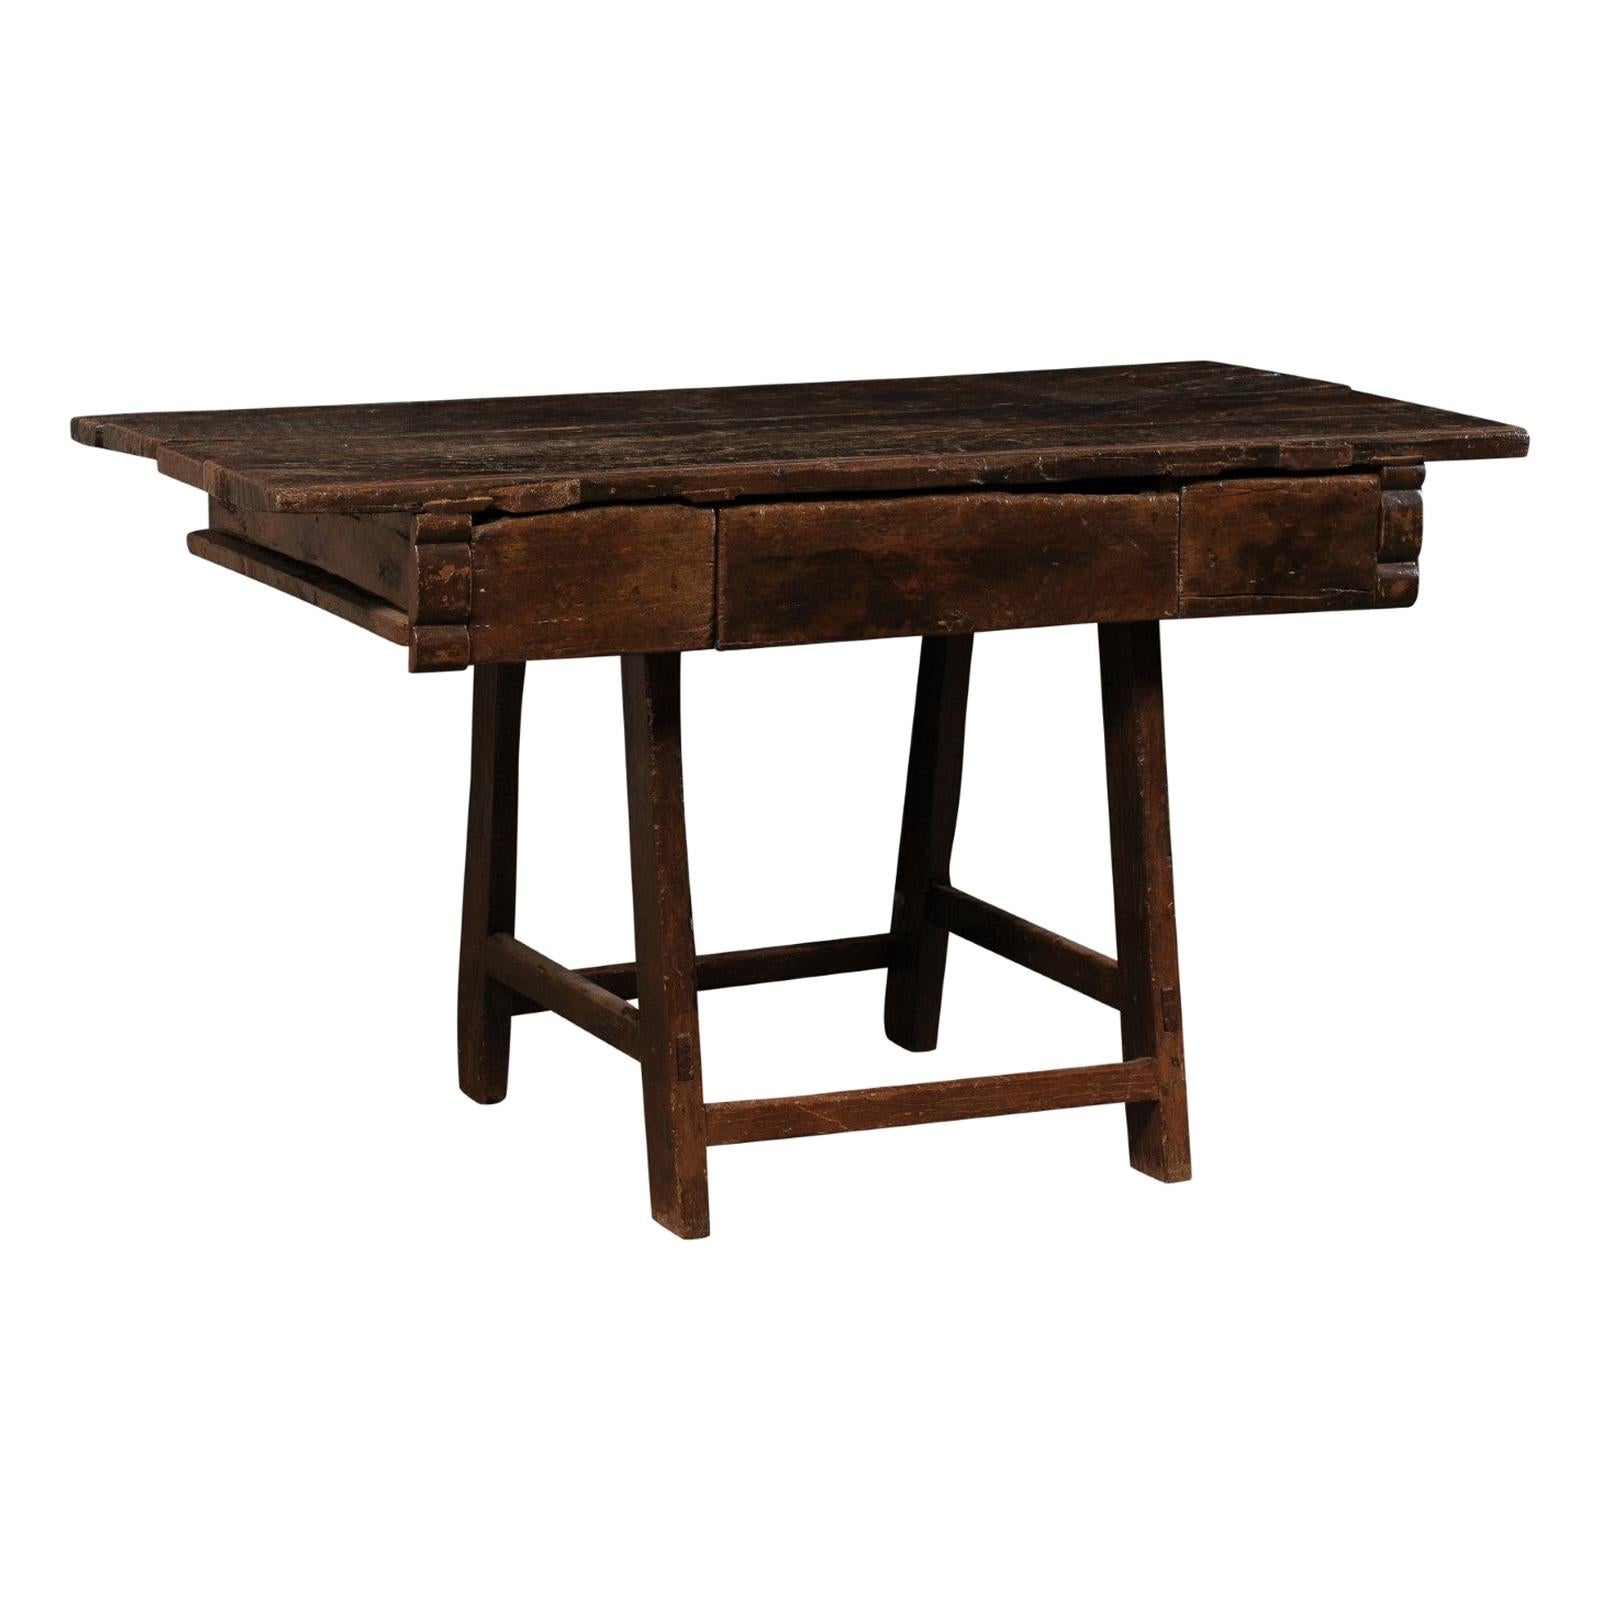 18th C. Brazilian Peroba Wood Table with Drawers, Exquisitely Rustic